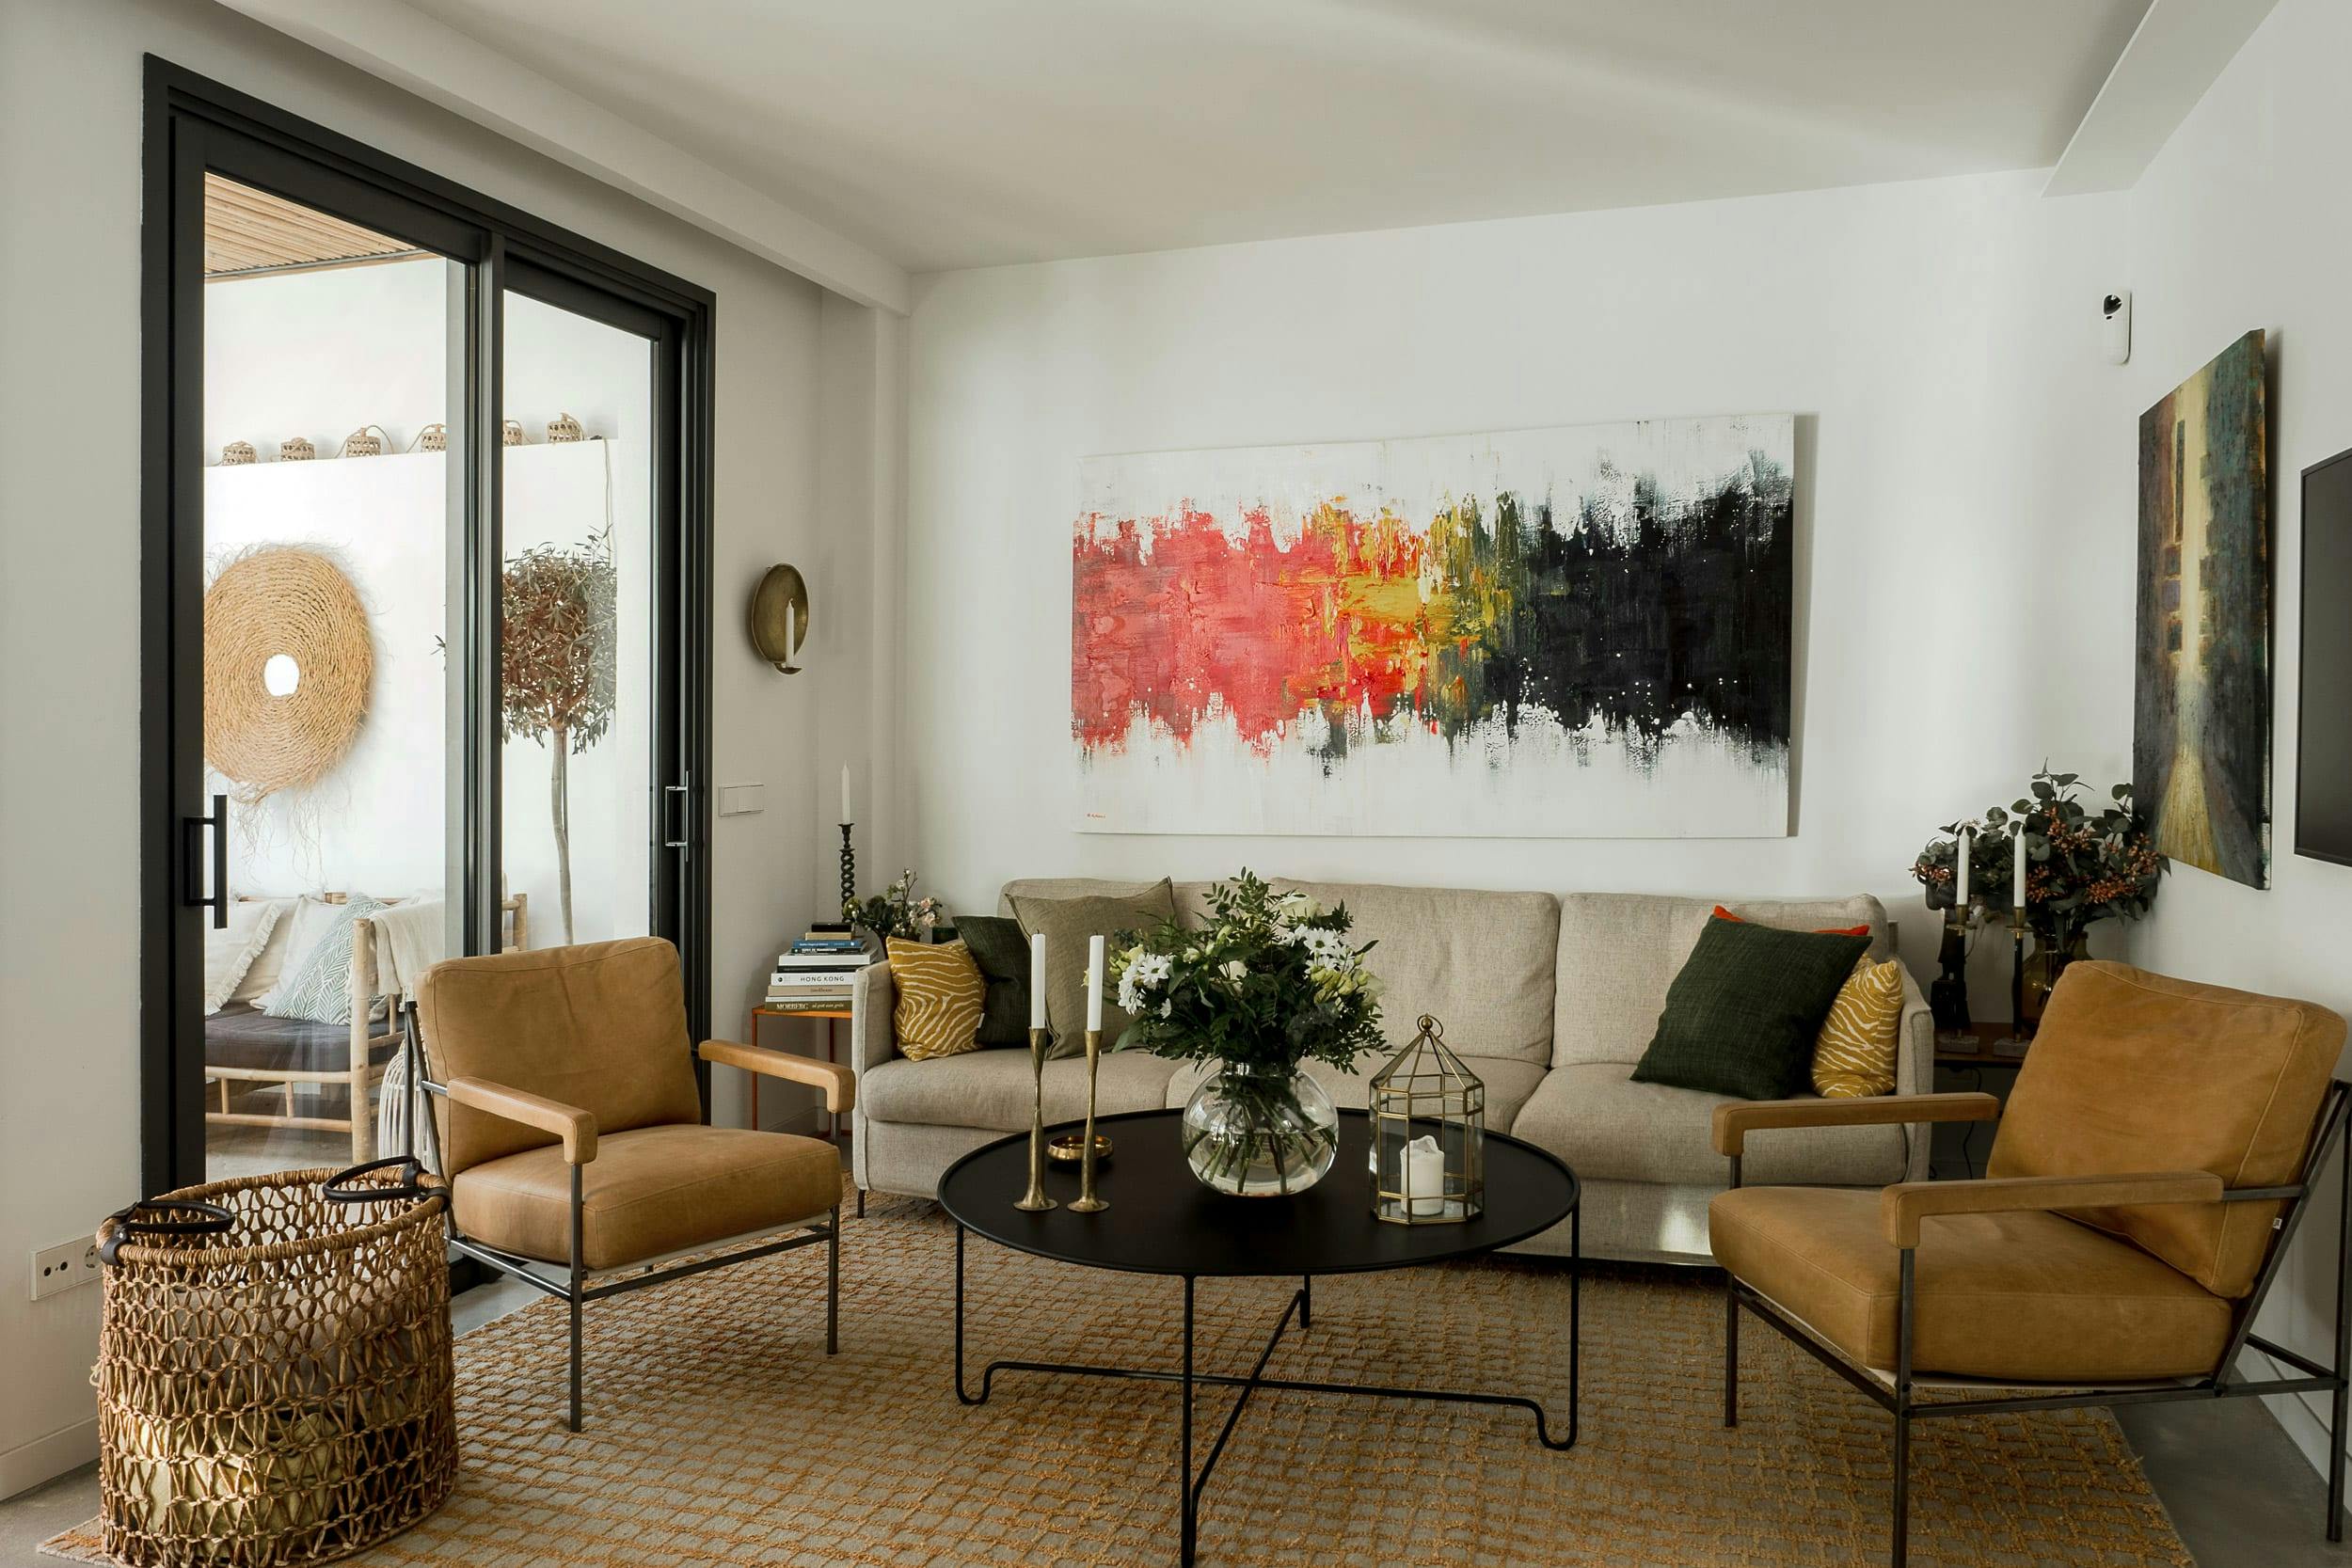 The image features a modern, well-lit living room with a large couch, two chairs, a coffee table, and a painting on the wall.